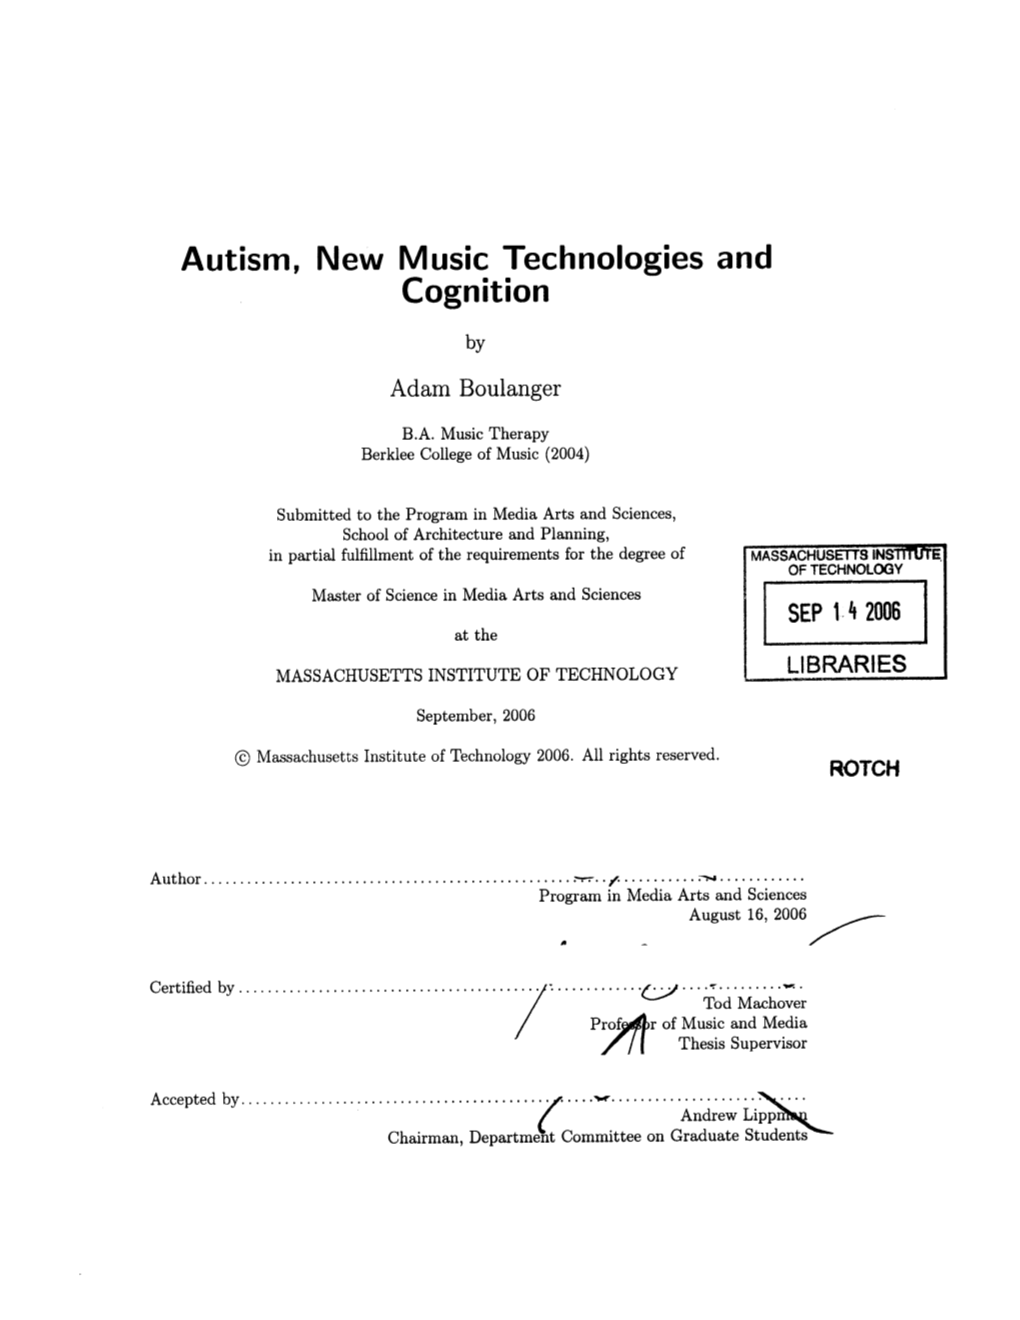 Autism, New Music Technologies and Cognition